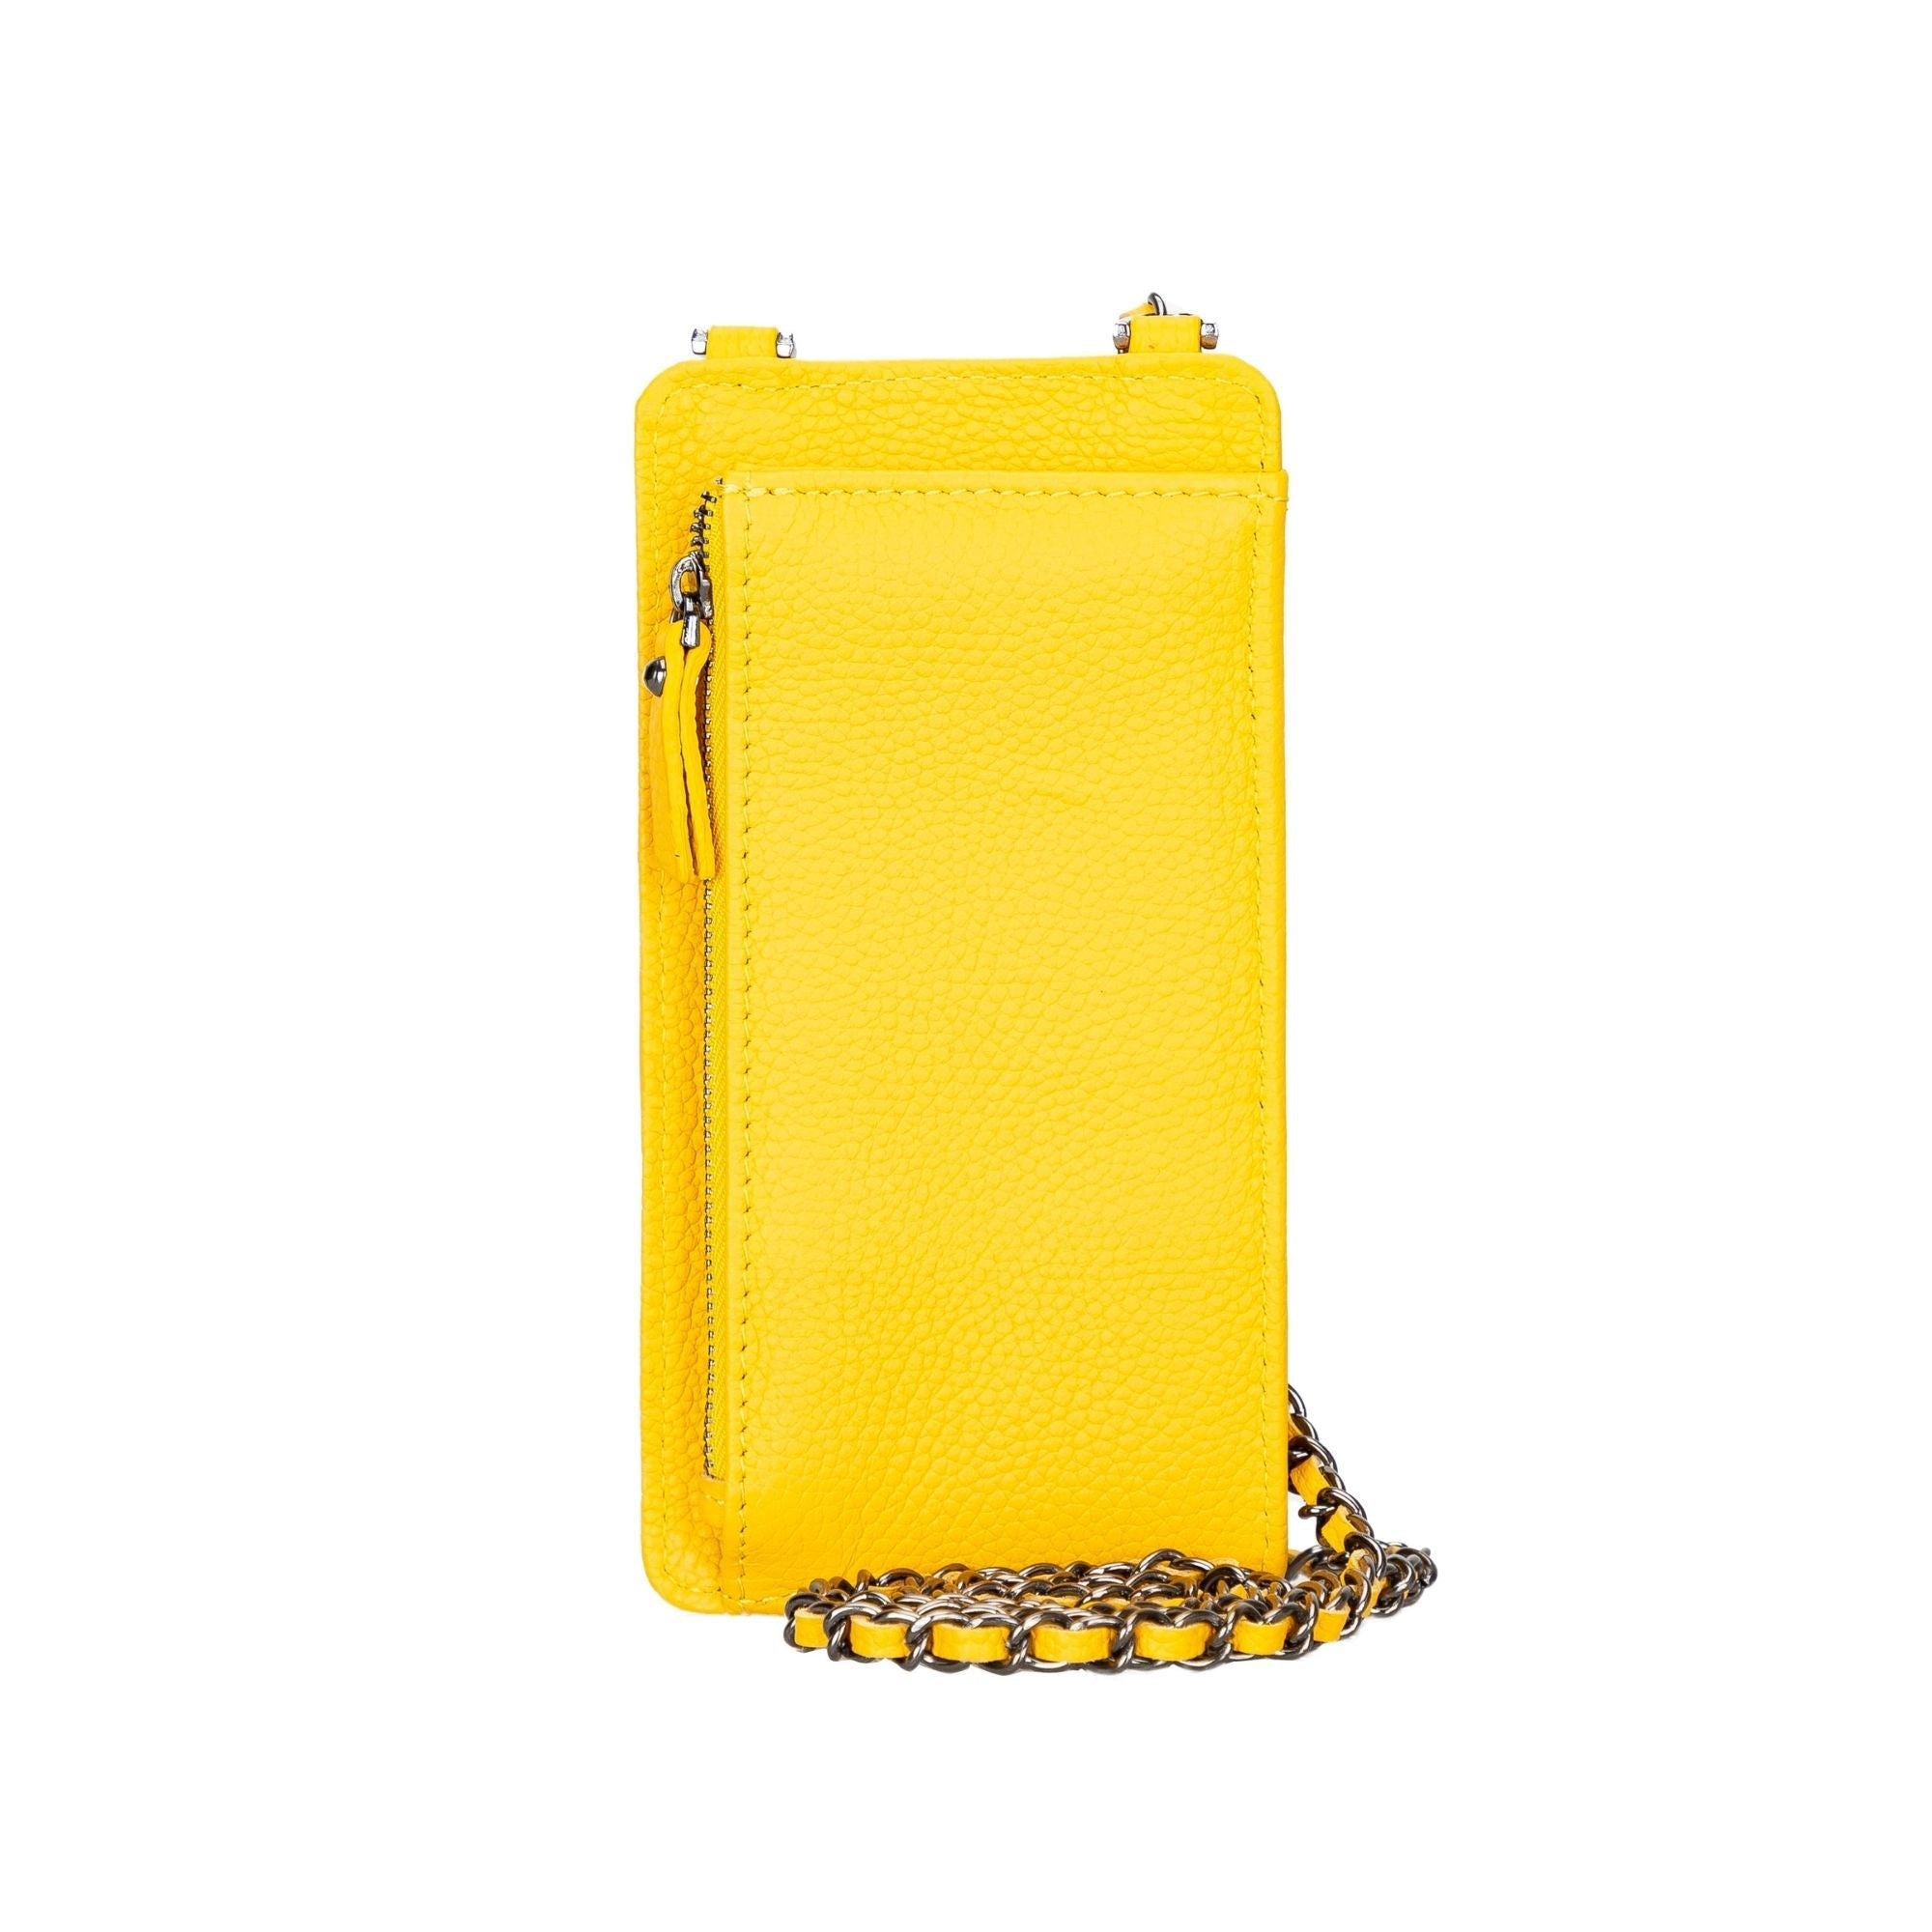 Lovell Leather Handbag with Phone Compartment and Shoulder Strap - Yellow - TORONATA